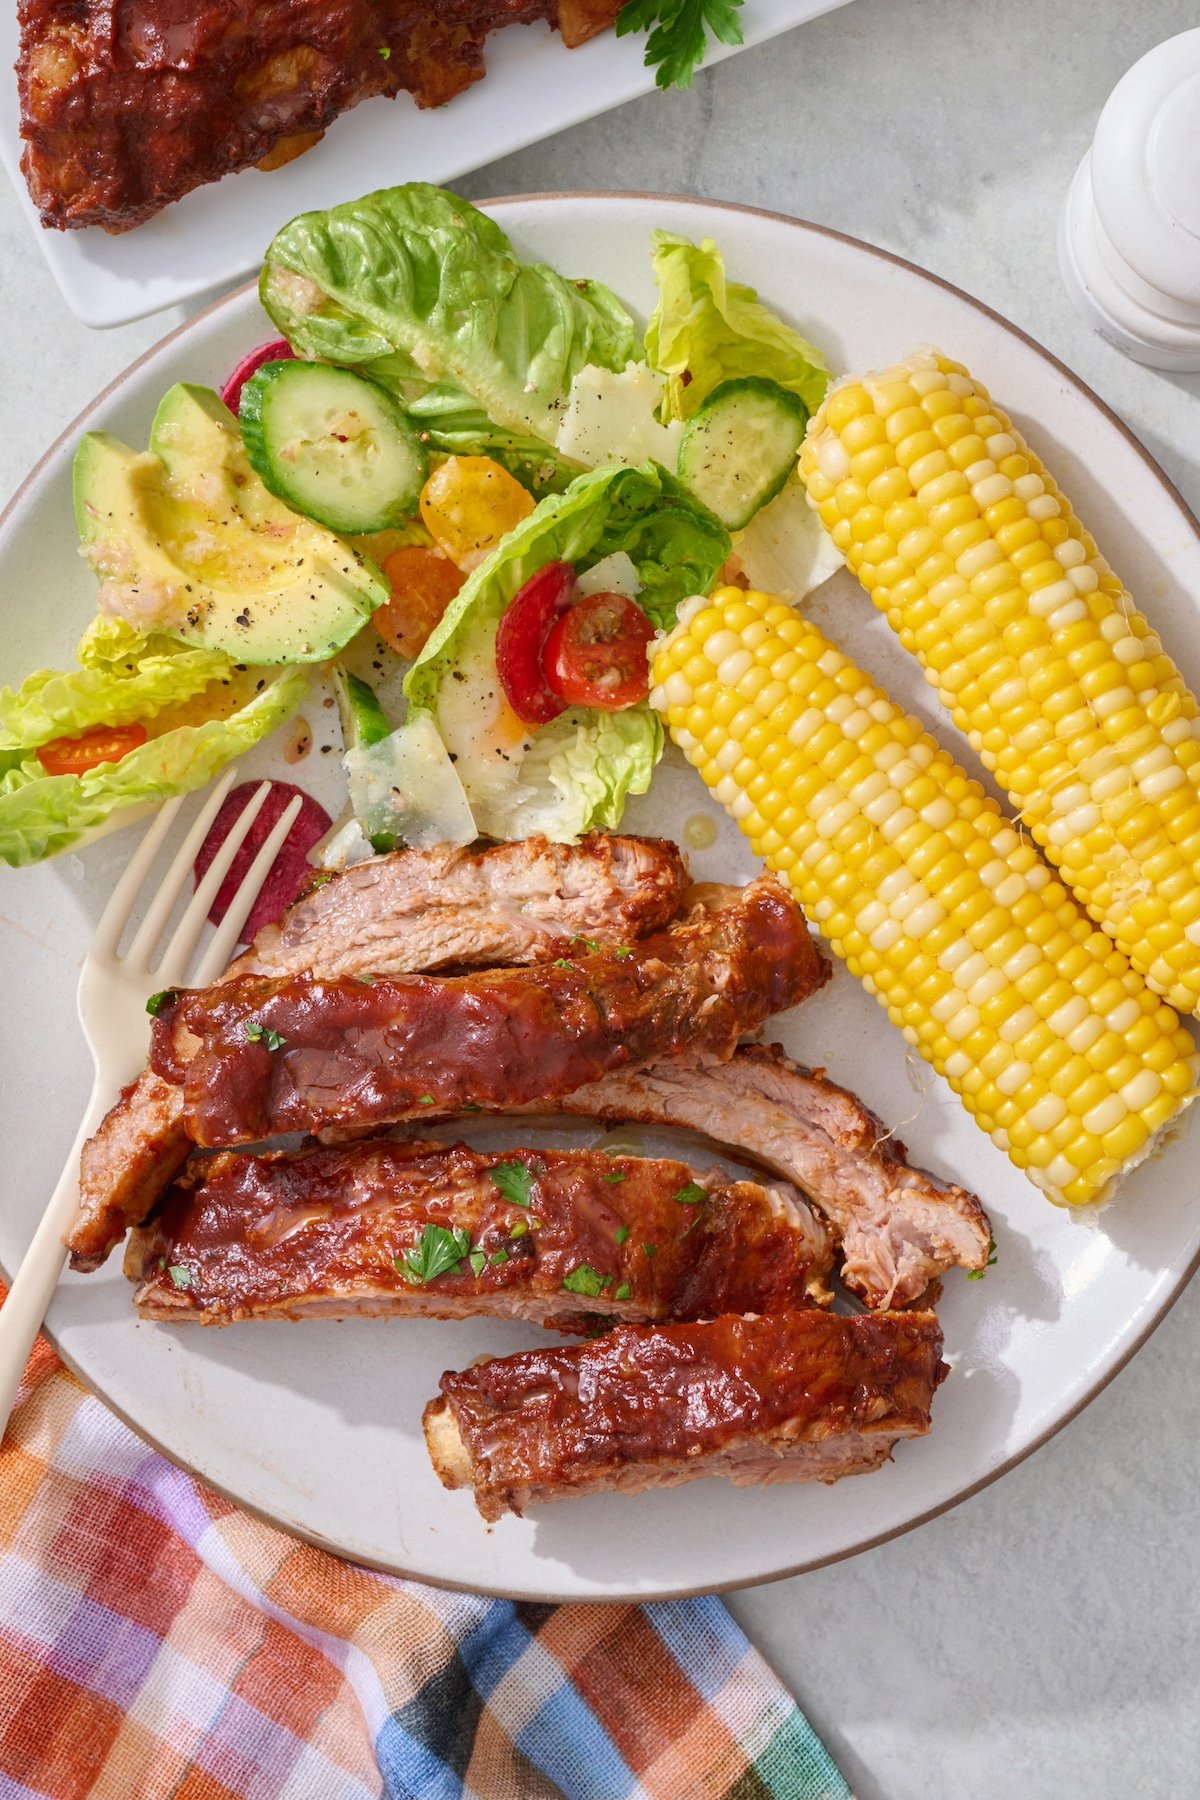 Crock pot ribs on a plate with side salad and corn on the cob.